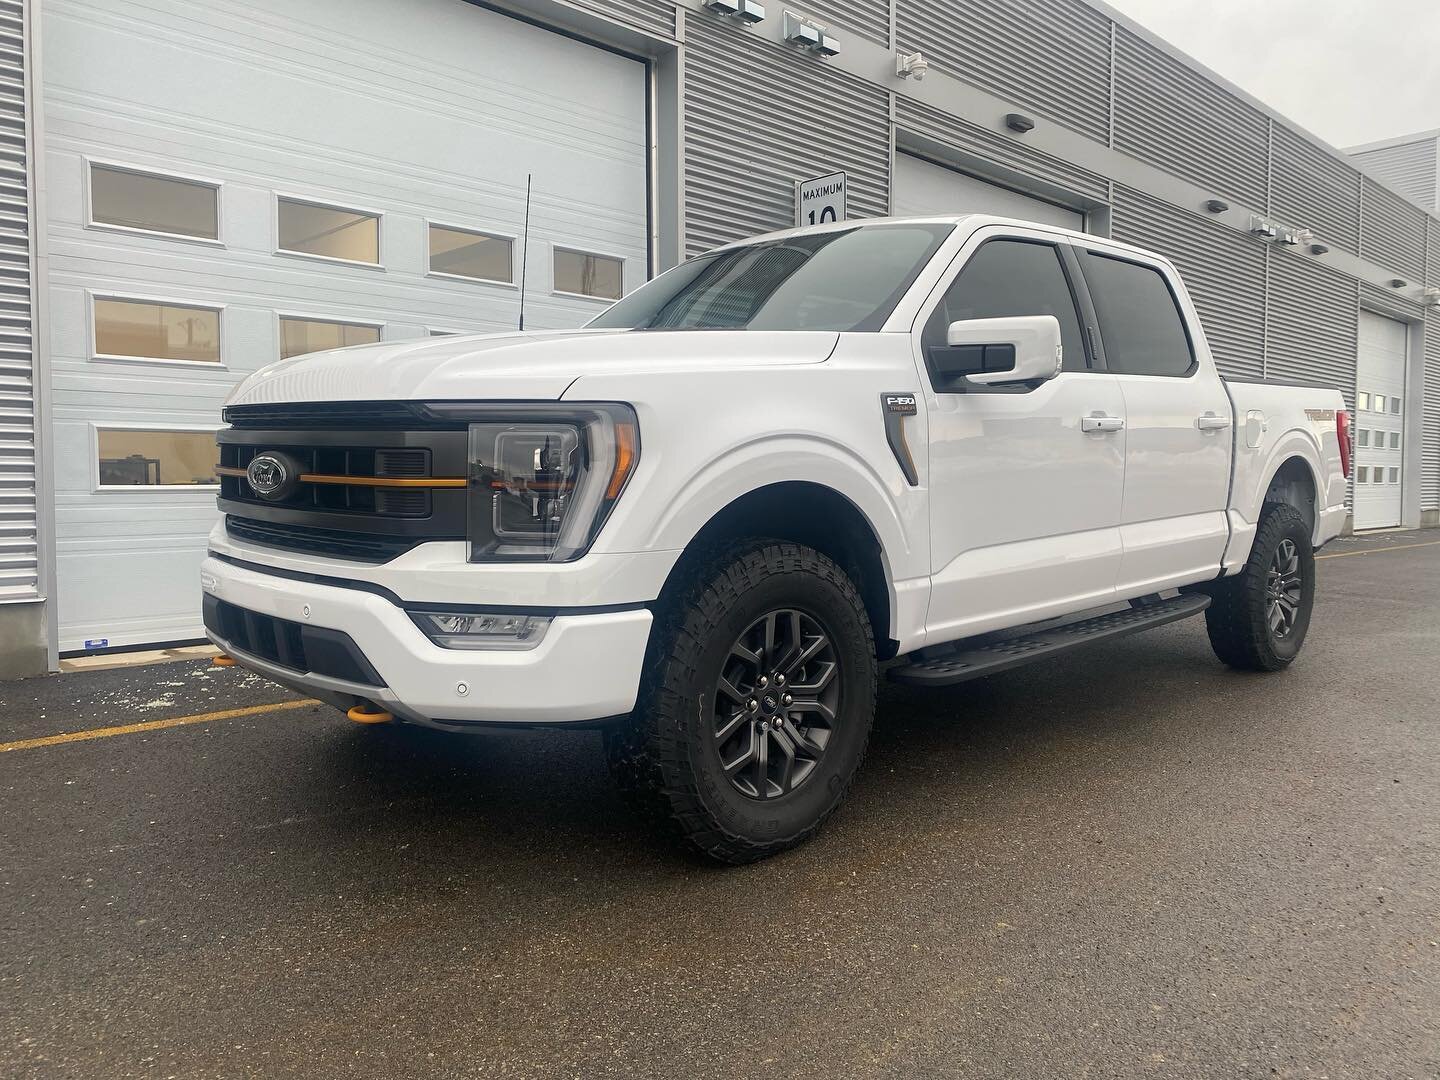 Keep your Ford F-150 Tremor looking fresh and protected with our partial front end paint protection film kit and 35% window film on the front. It's the perfect combo of style and protection. #FordF150 #Tremor #PaintProtection #WindowTinting #CarsofIn